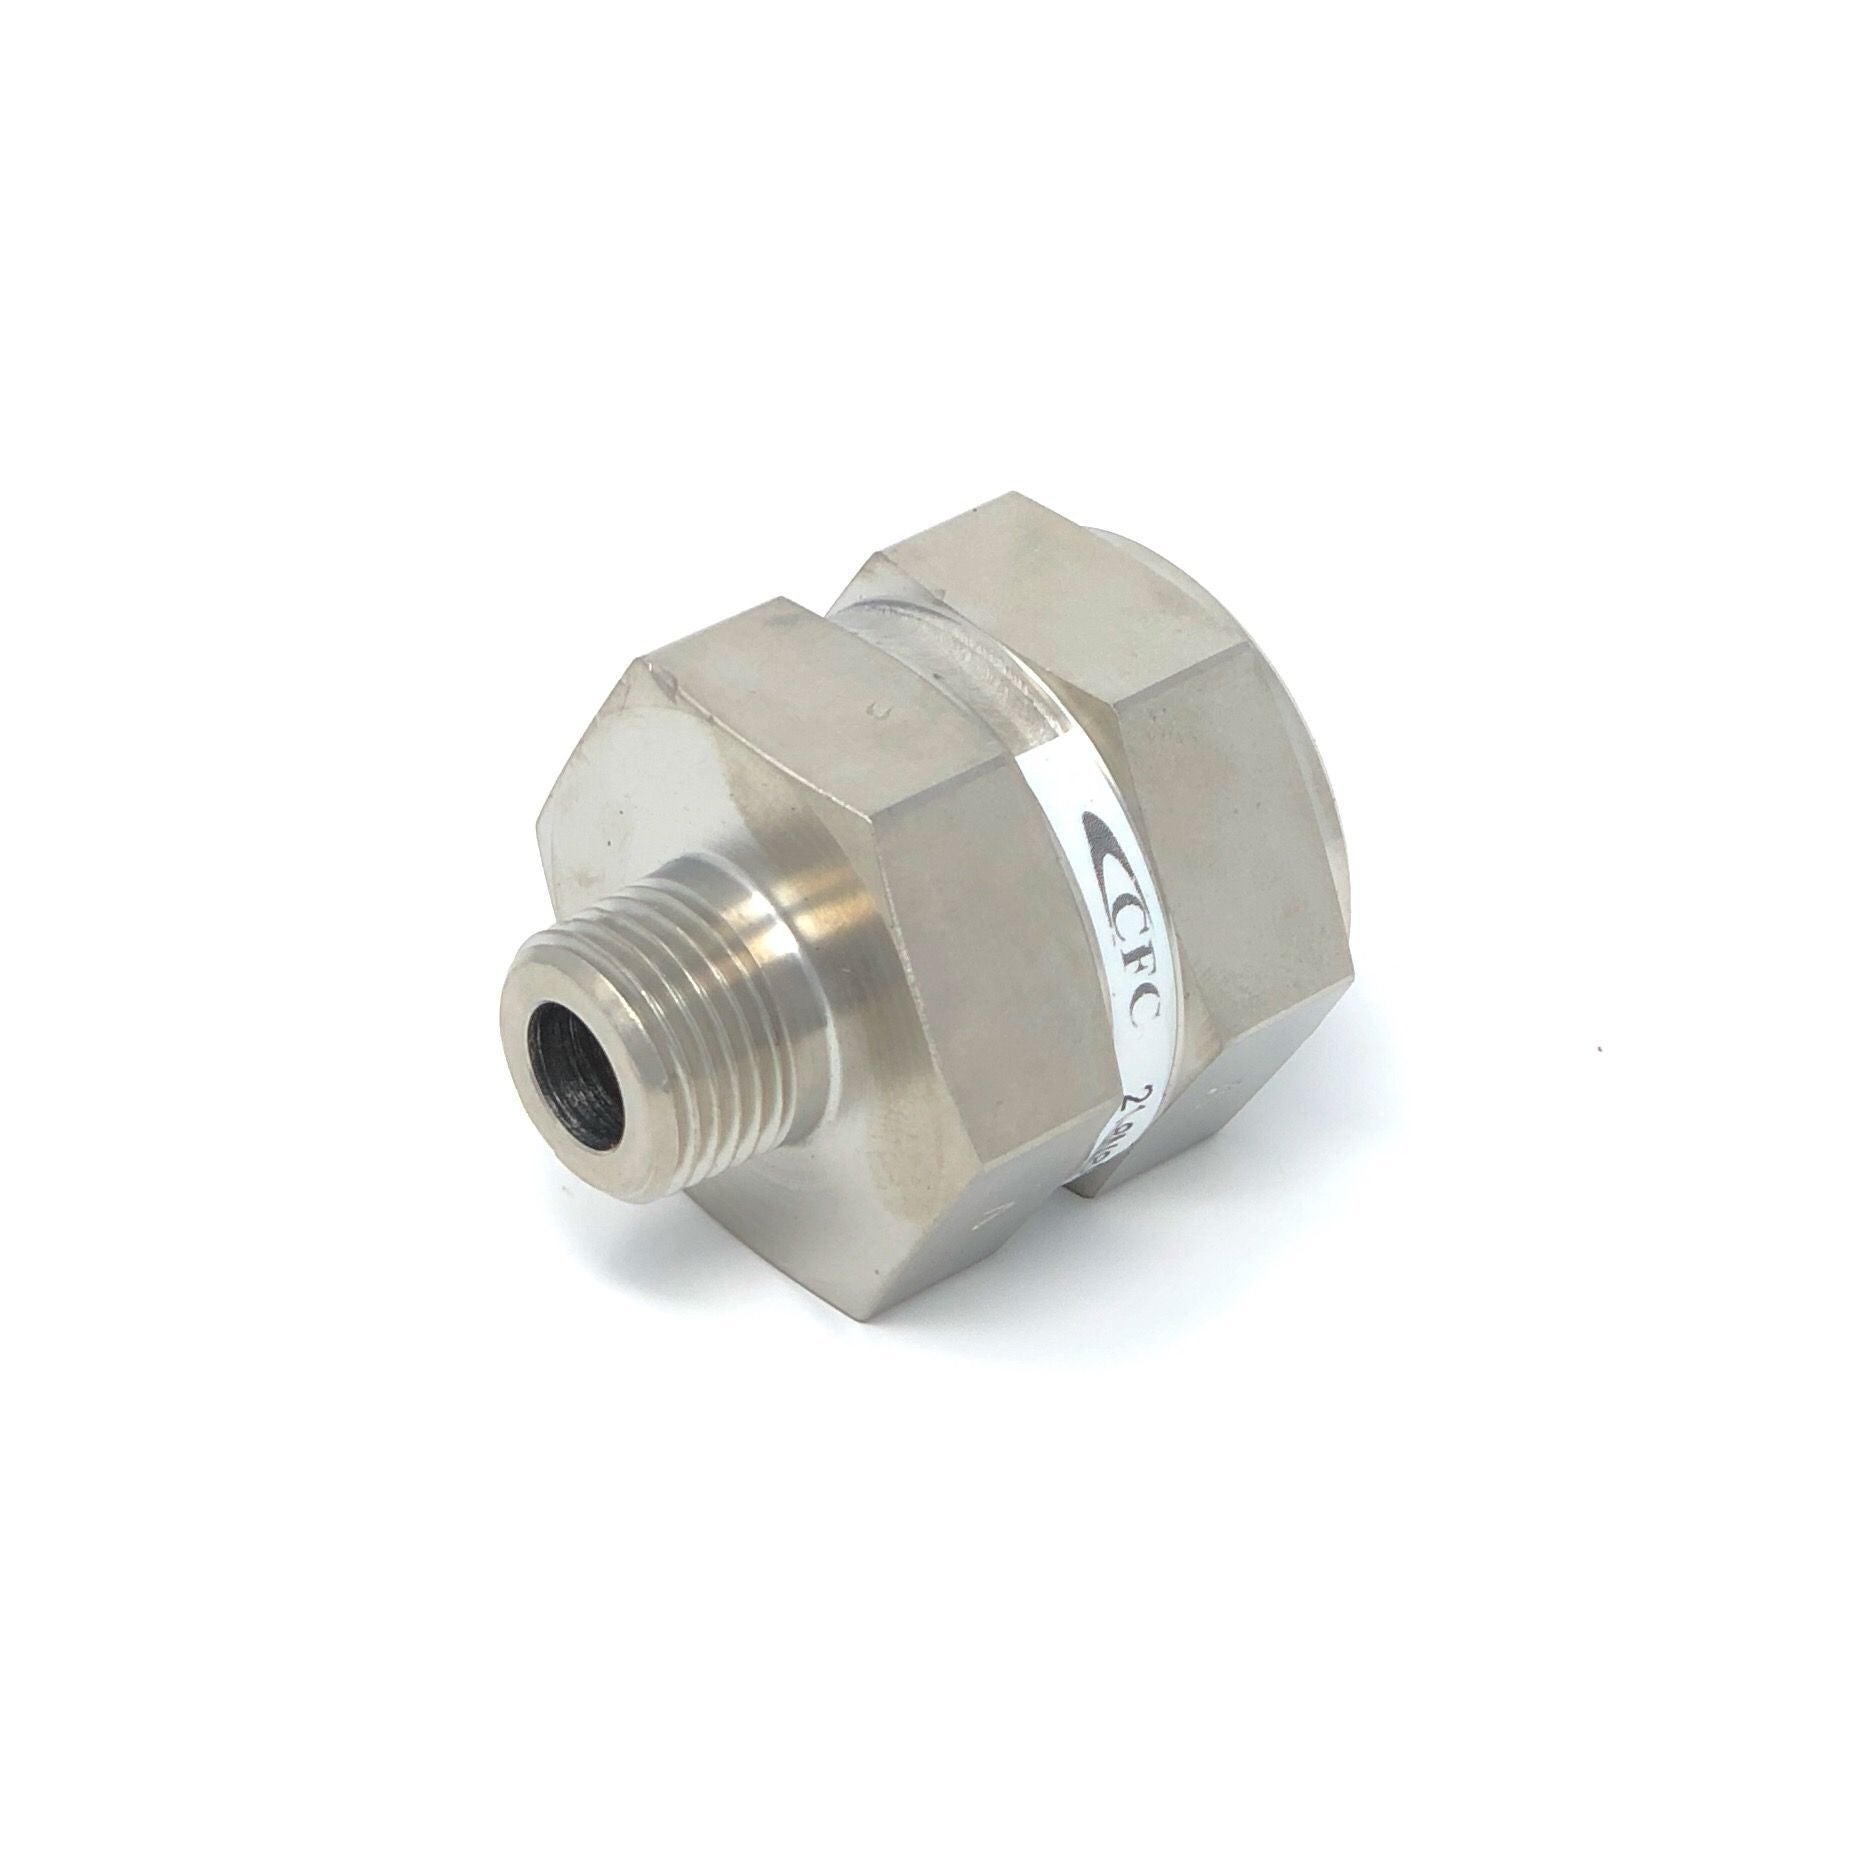 21-4N4N-40S : Chase High Pressure Inline Filter, 6000psi, 1/4" NPT, 40 Micron, No Visual Indicator, No Bypass